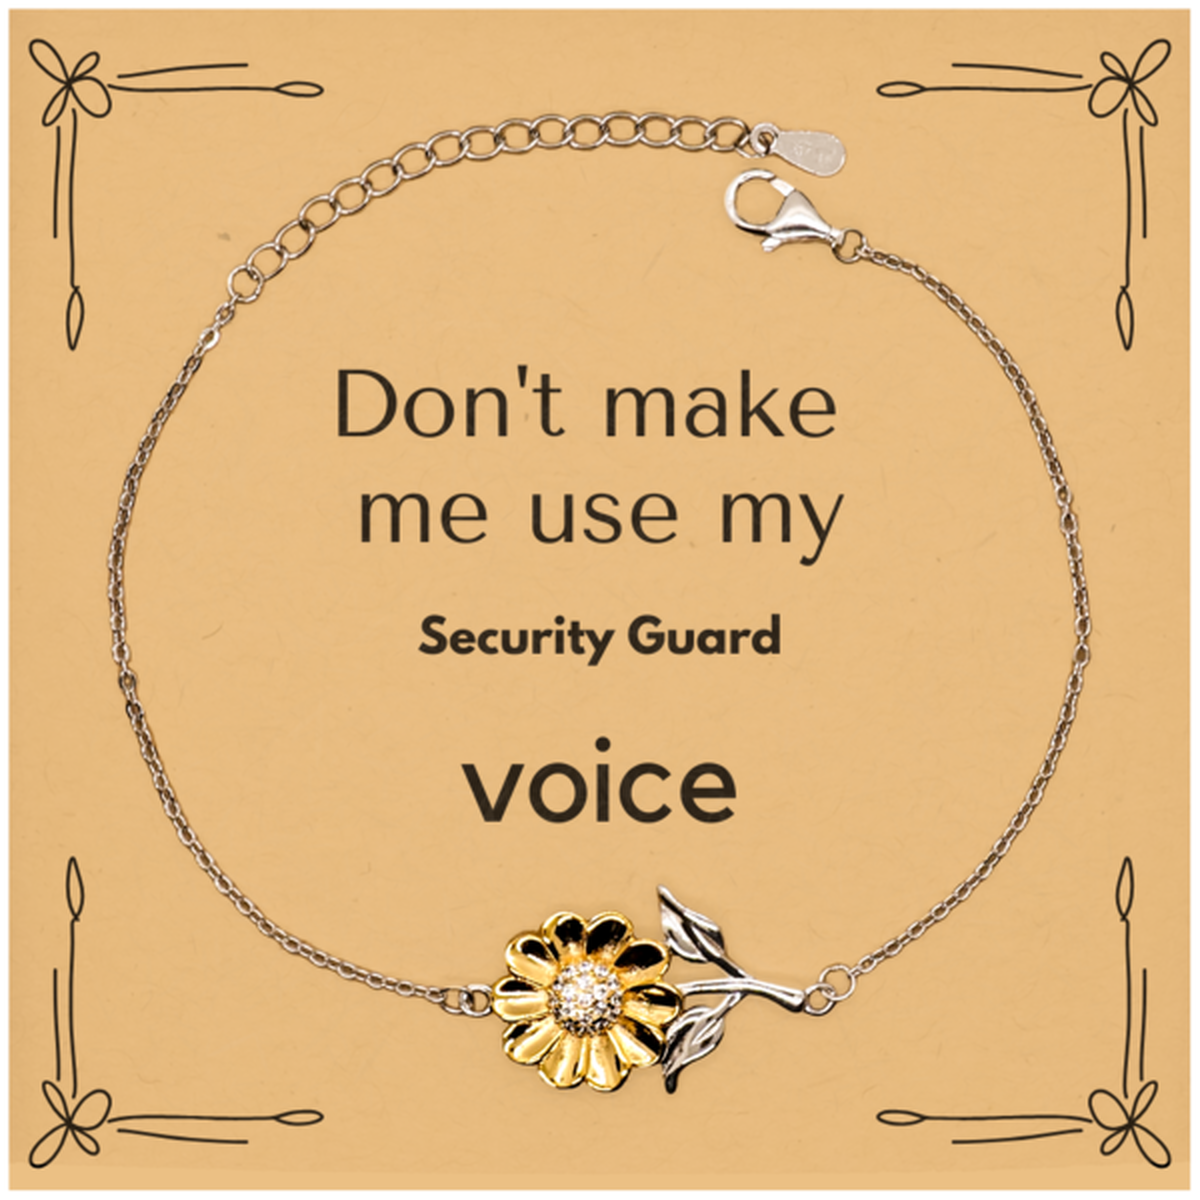 Don't make me use my Security Guard voice, Sarcasm Security Guard Card Gifts, Christmas Security Guard Sunflower Bracelet Birthday Unique Gifts For Security Guard Coworkers, Men, Women, Colleague, Friends